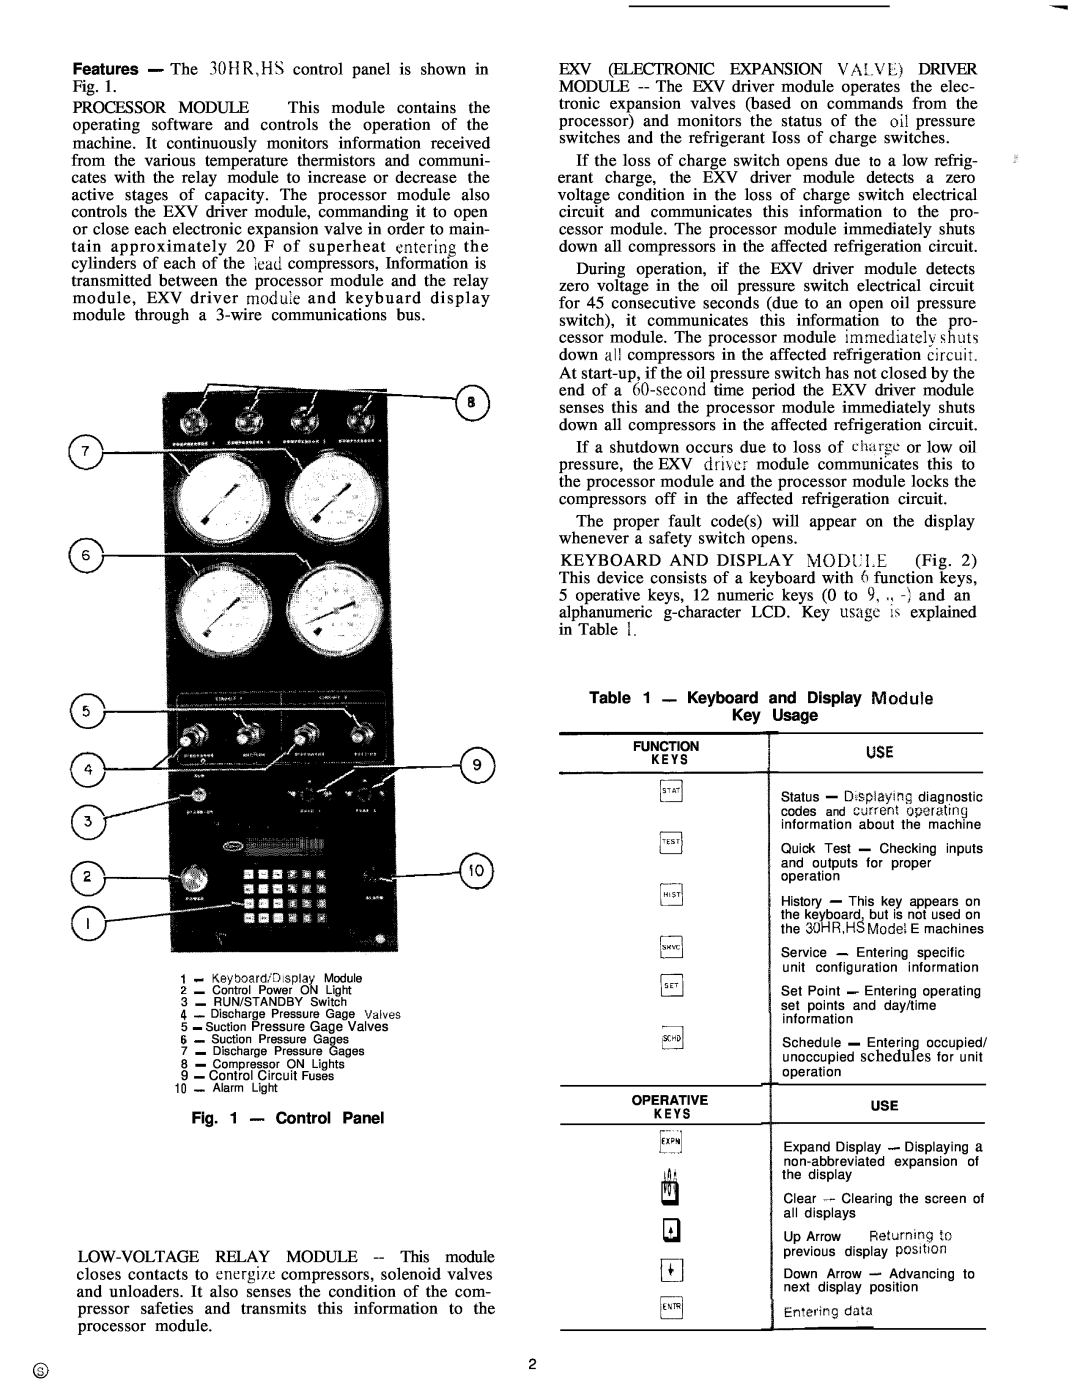 Carrier HS070-160 manual Features - The 30HR,HS control panel is shown in Fig 